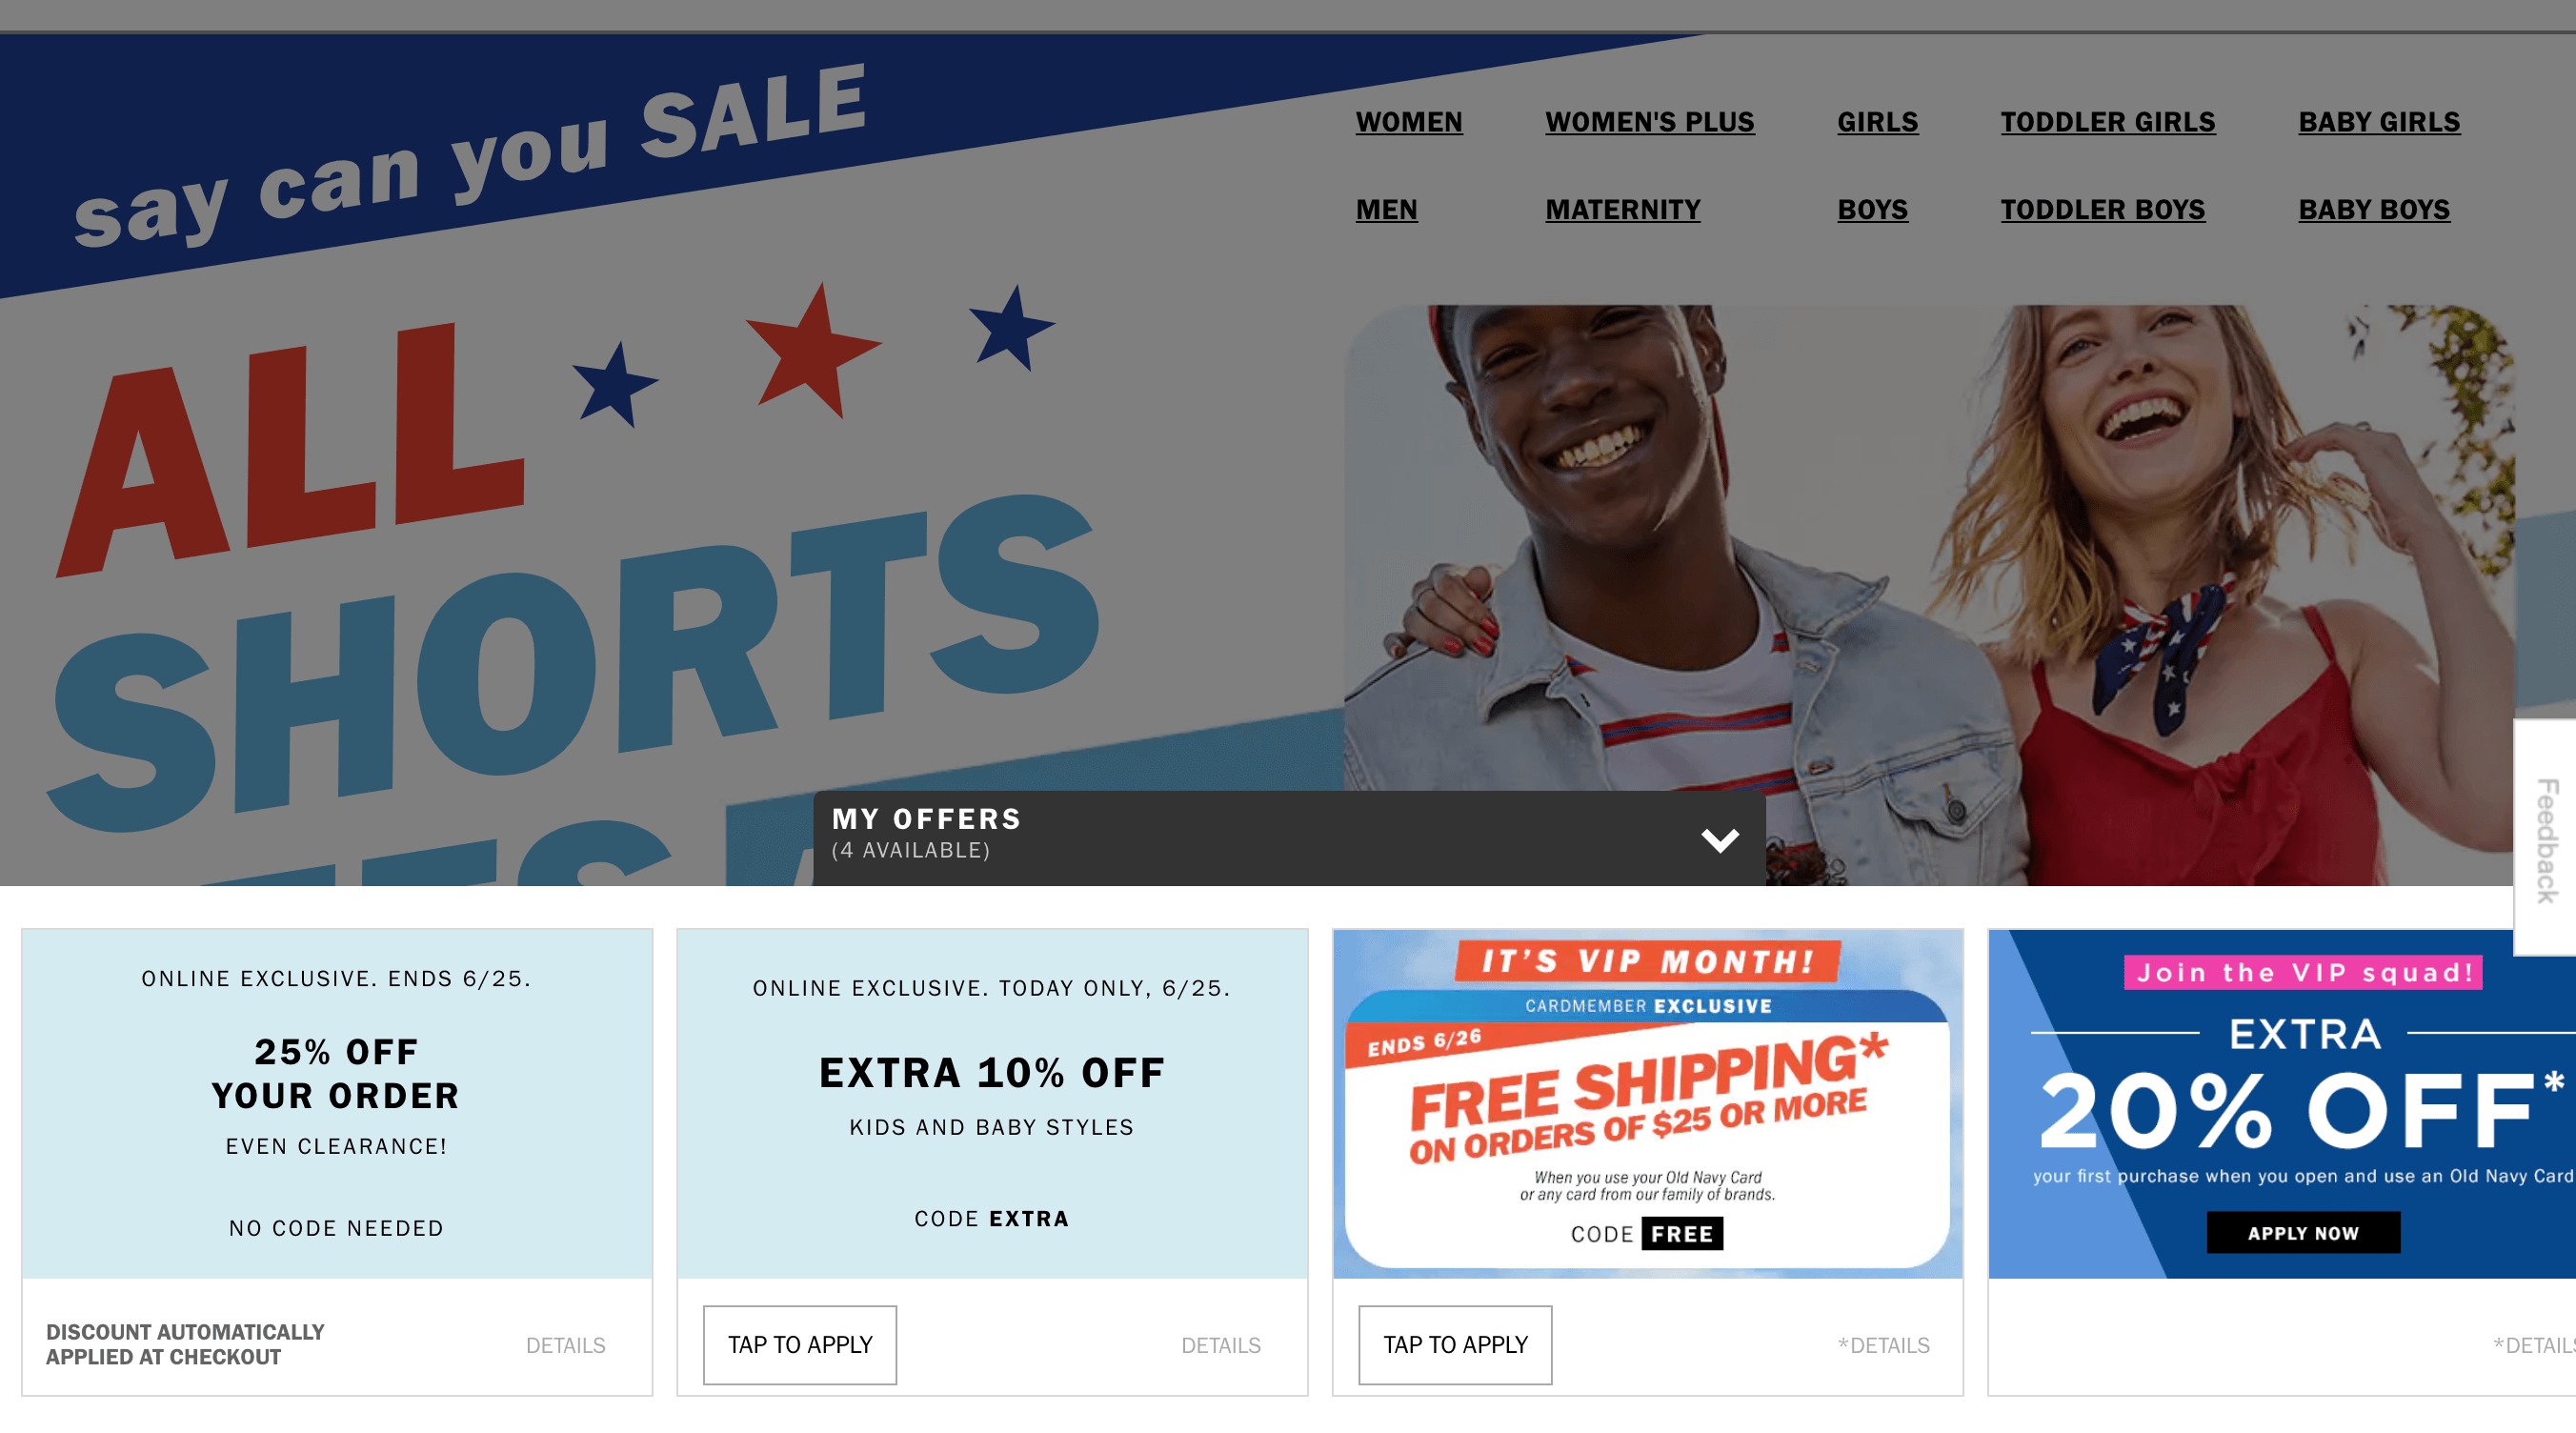 https://contentsquare.com/wp-content/uploads/2021/03/Old-Navy-Applicable-Coupons-and-Offers-Homepage.png